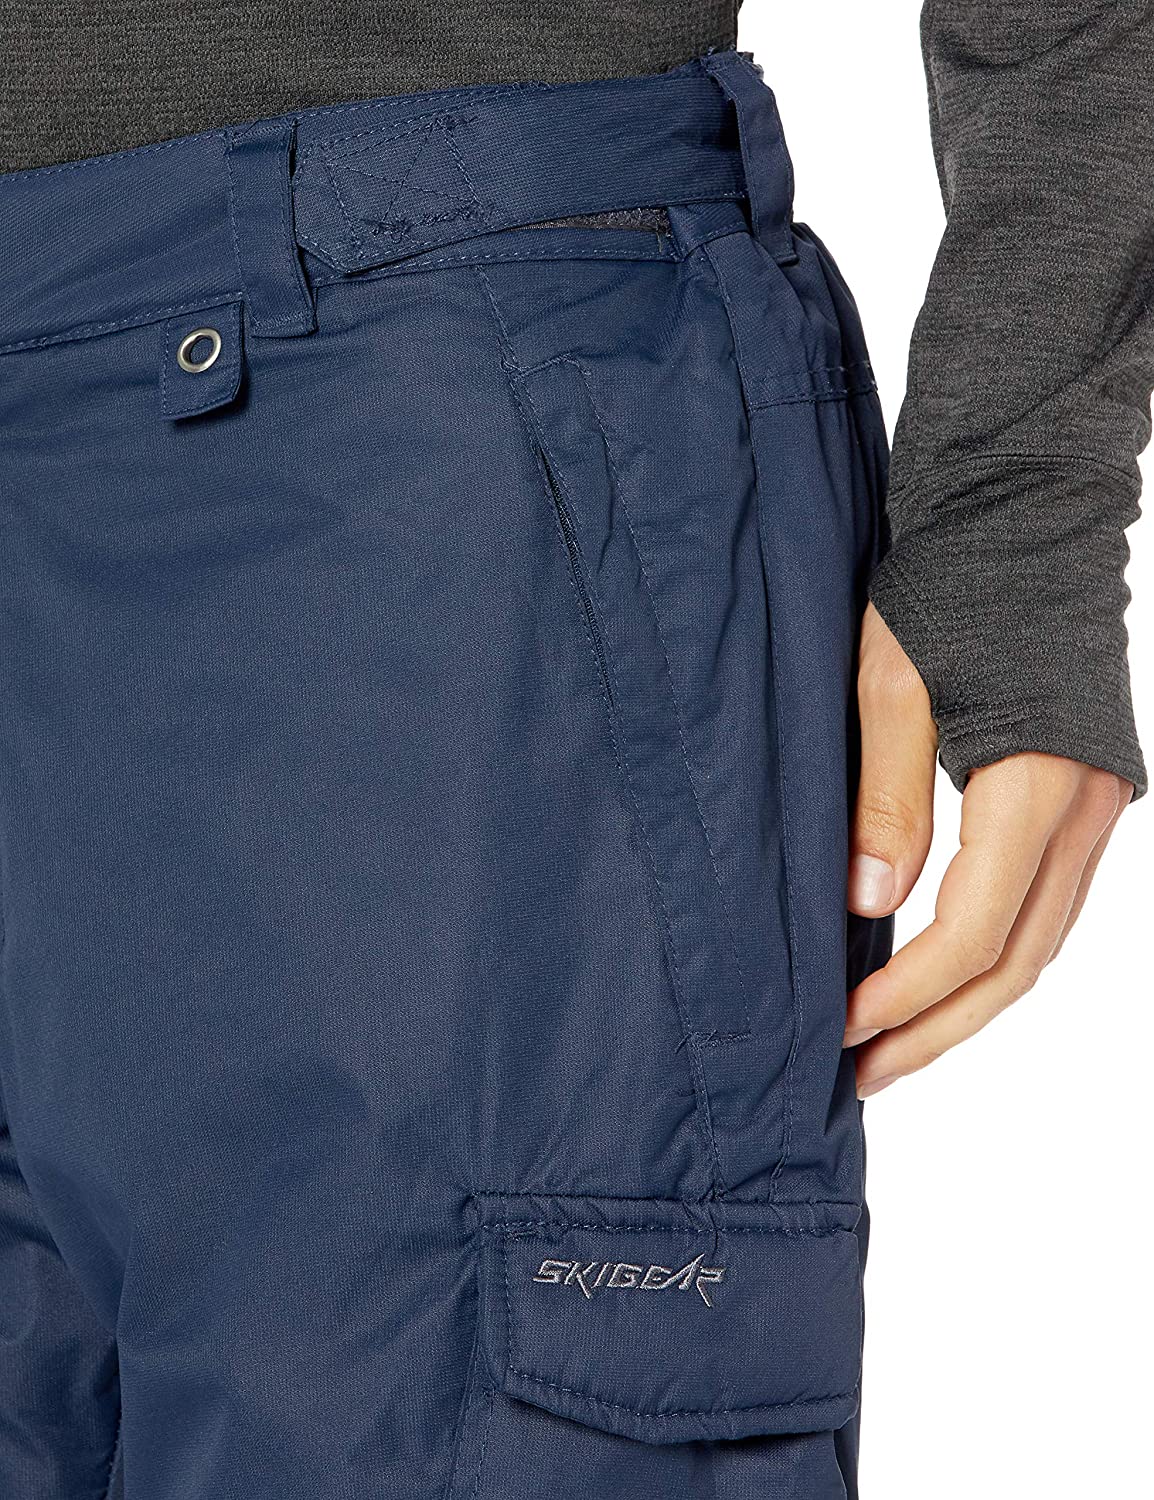 SkiGear by Arctix Men's Snow Sports Cargo Pants - image 3 of 4